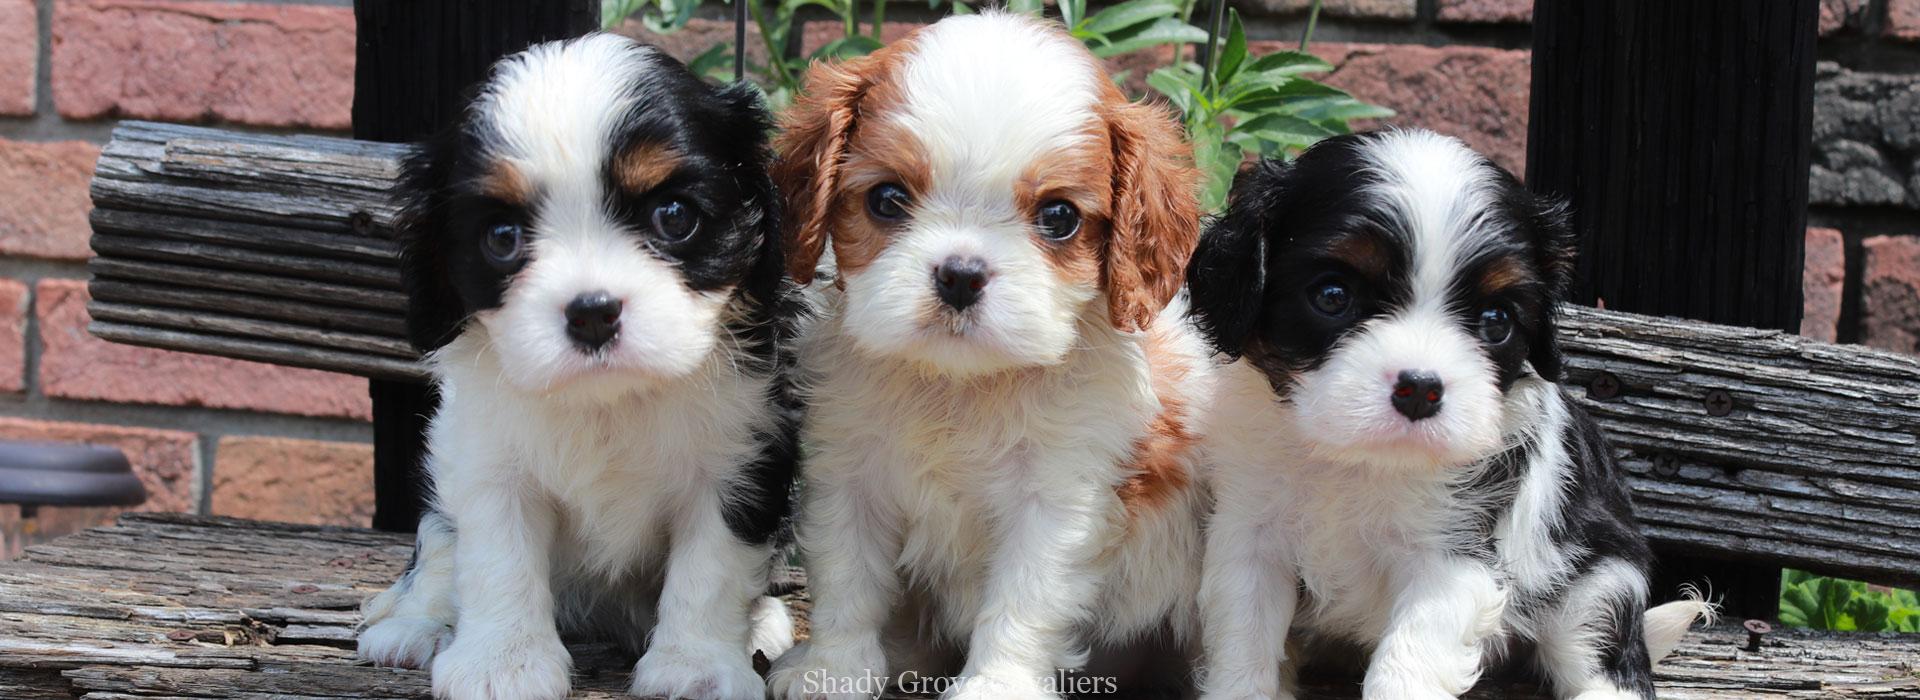 slim site Ecologie Cavalier King Charles Spaniel Puppies from Shady Grove Cavaliers